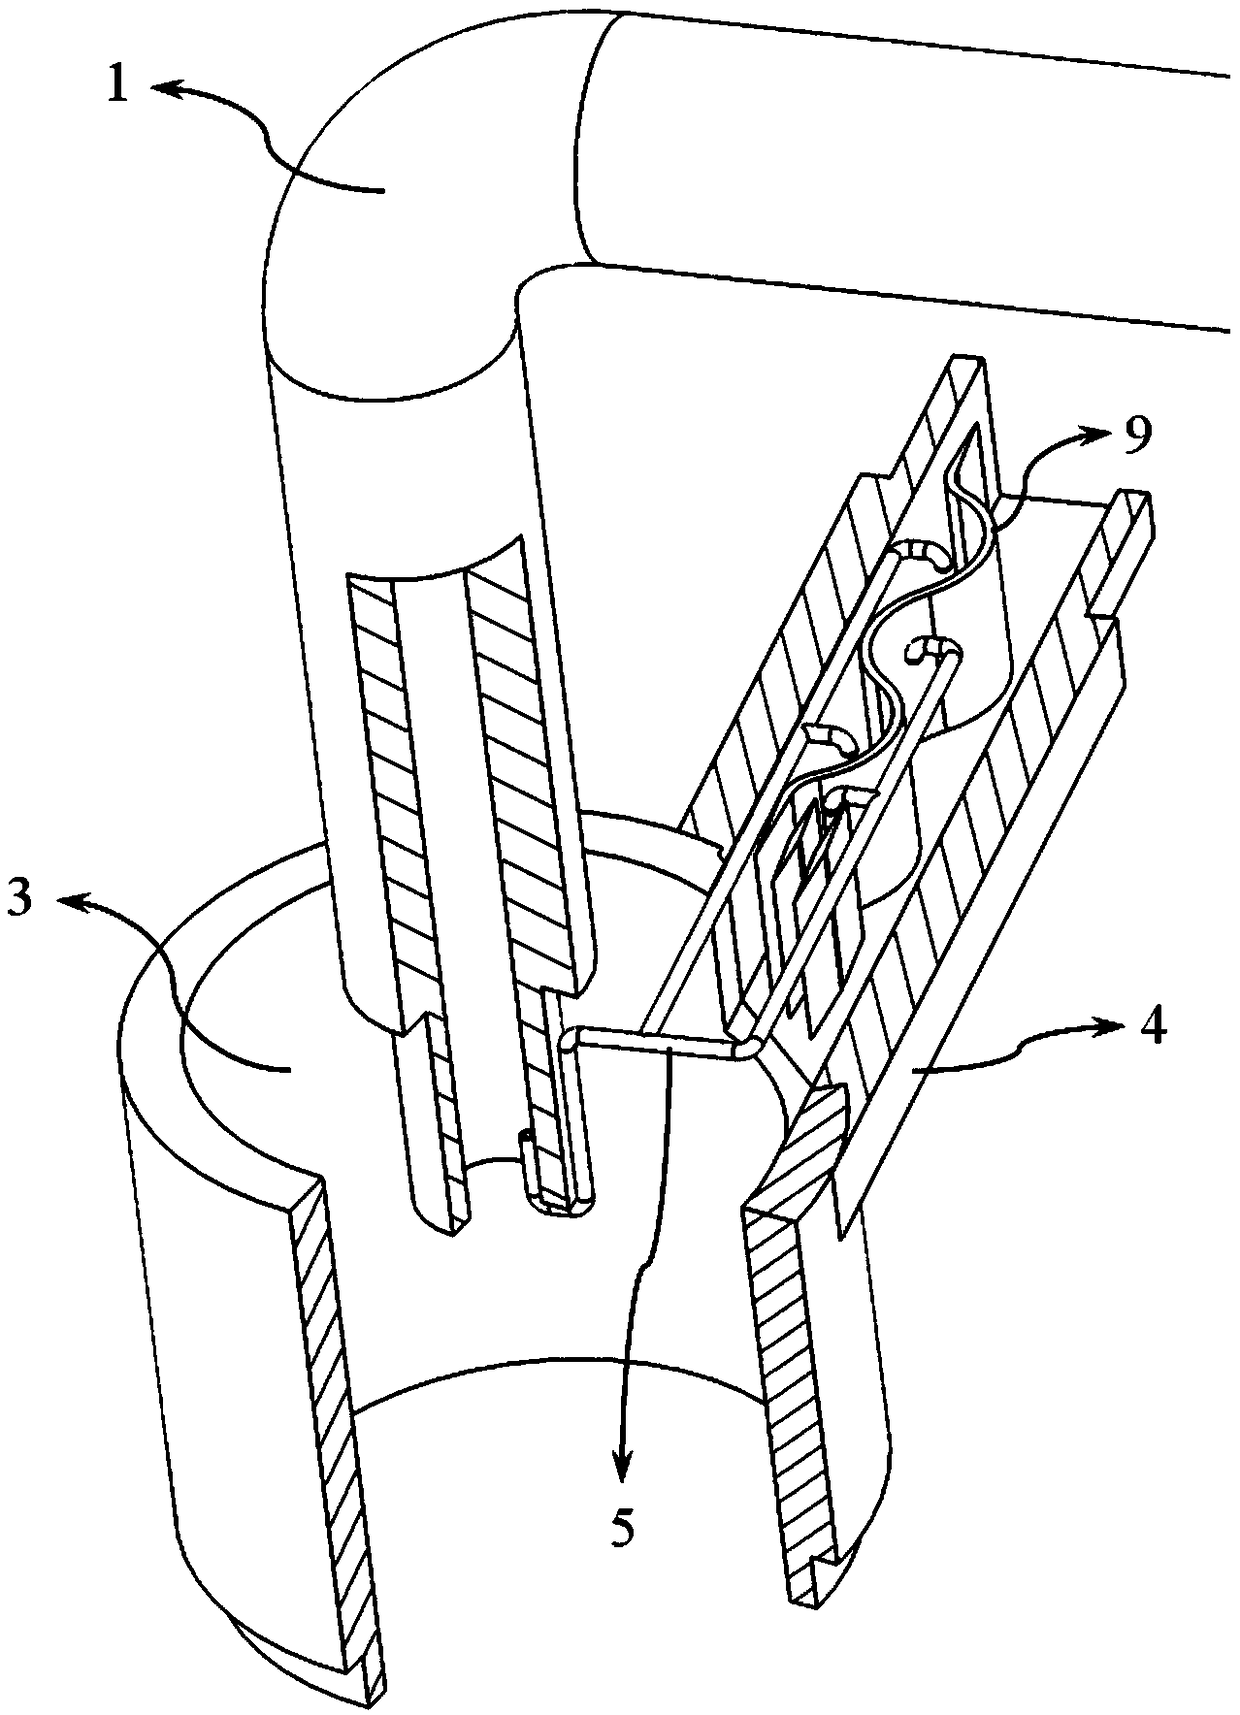 Tangential inlet capable of achieving twice separation and single-stage oil-water cyclone separator